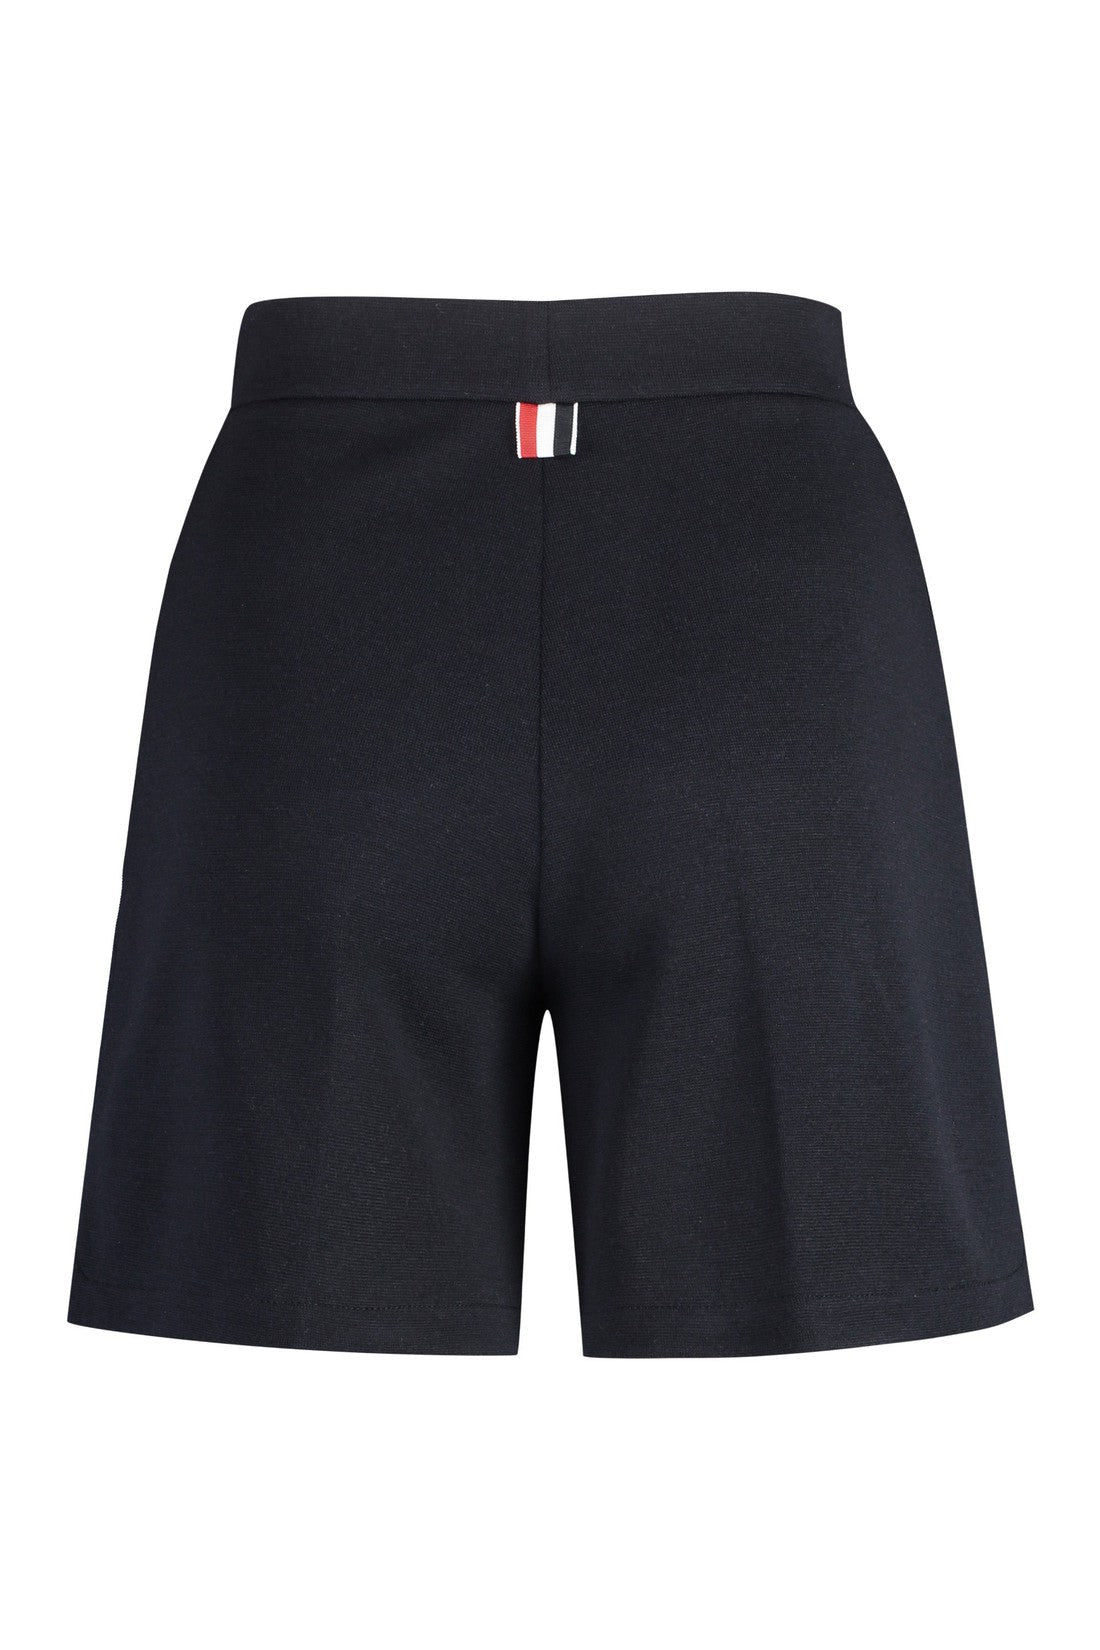 Thom Browne-OUTLET-SALE-Wool shorts-ARCHIVIST